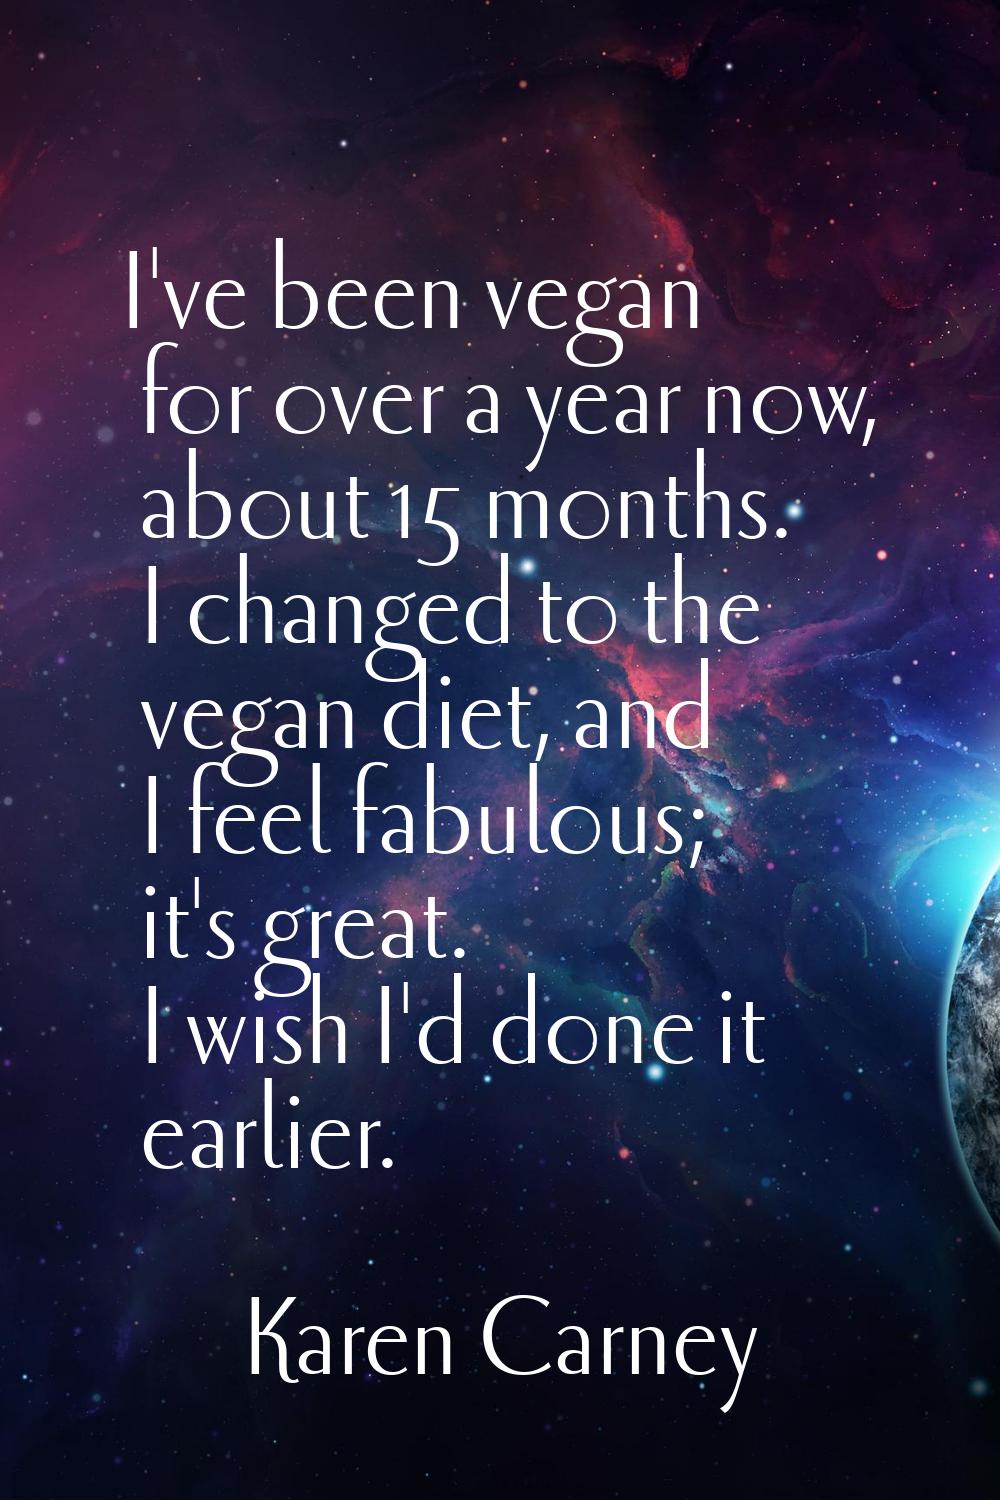 I've been vegan for over a year now, about 15 months. I changed to the vegan diet, and I feel fabul